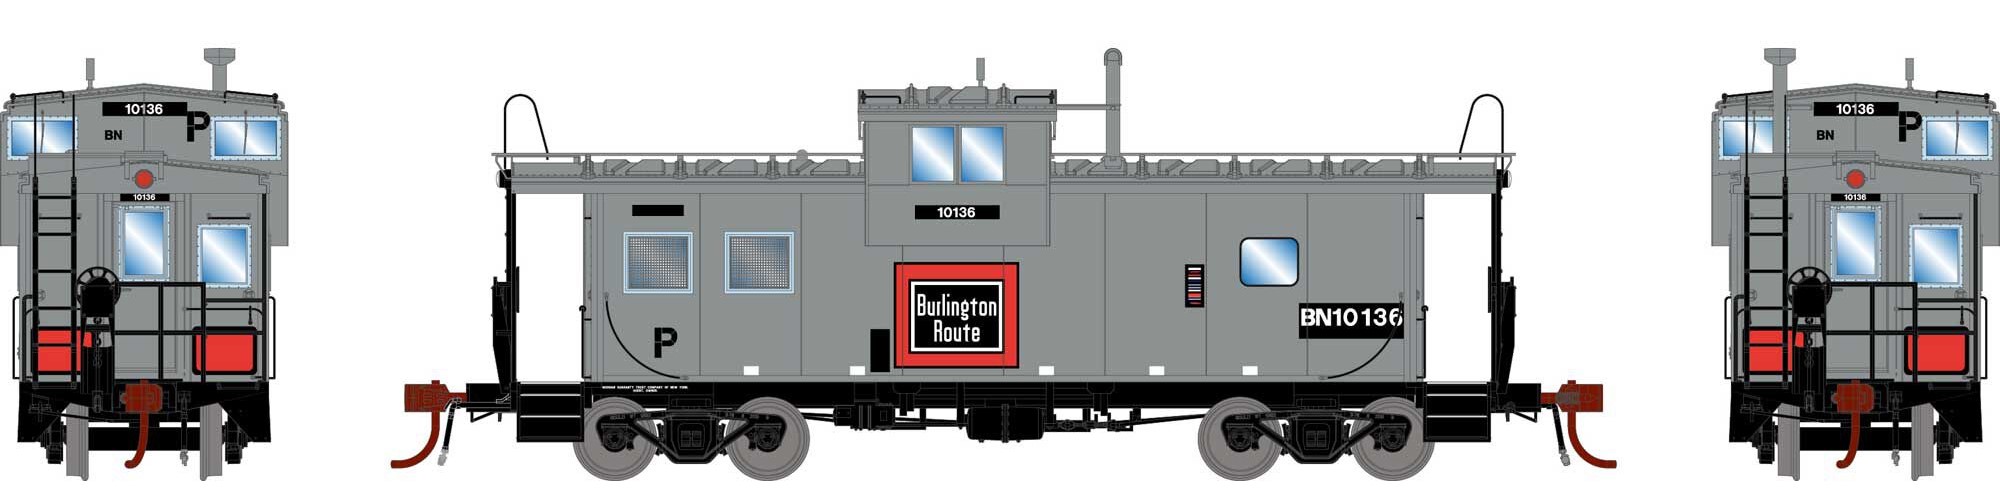 Athearn Genesis HO ATHG78367 DCC/Tsunami SoundCar Equipped ICC Caboose w/Lights & Sound Burlington Northern 'Patched' BN #10136